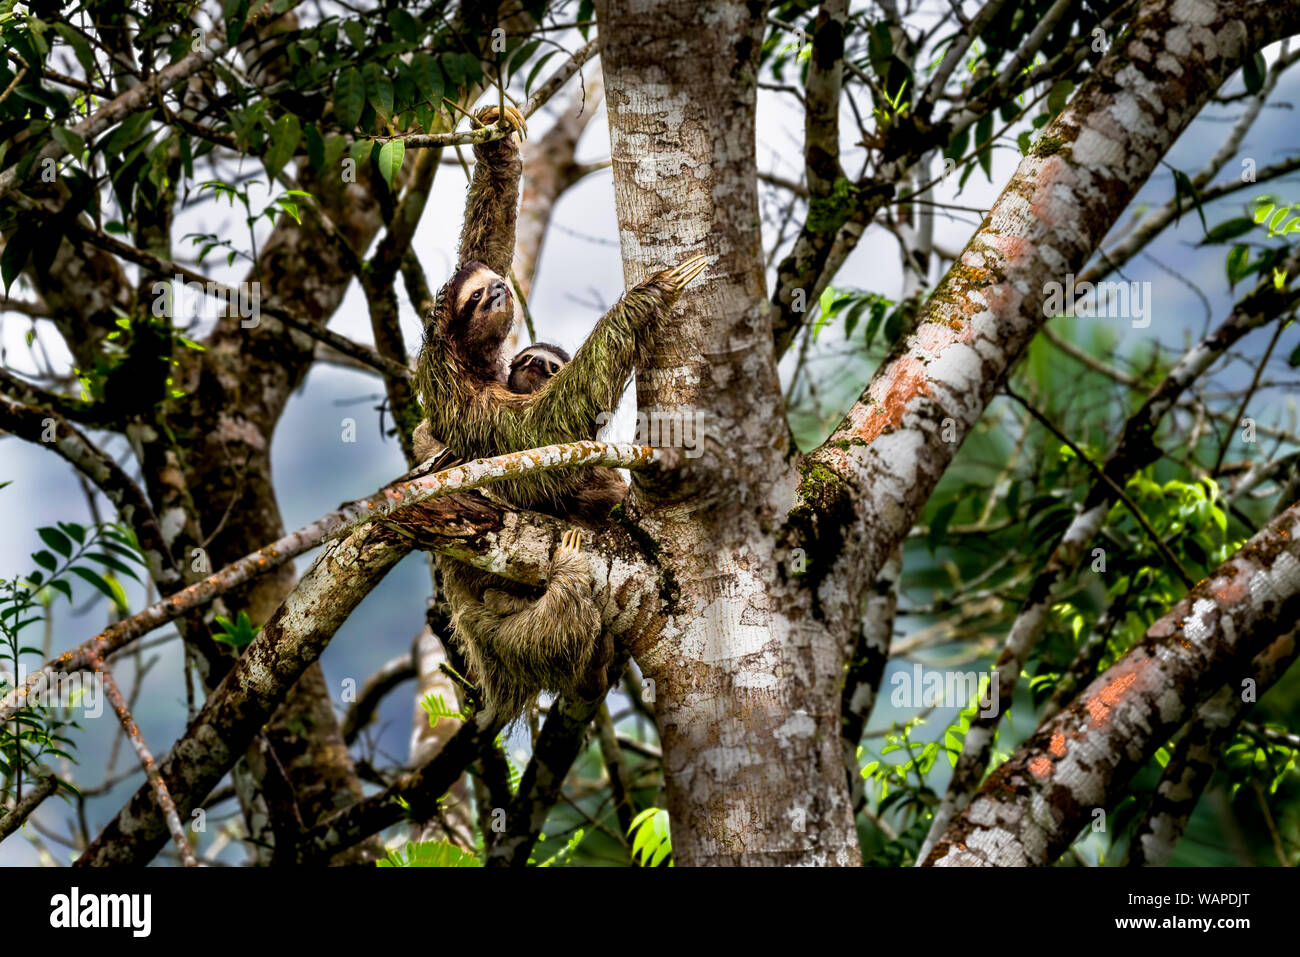 Brown-throated sloth (Bradypus variegatus) ia three-toed sloth with its young climbing up a tree image taken in the rain forest of Panama Stock Photo